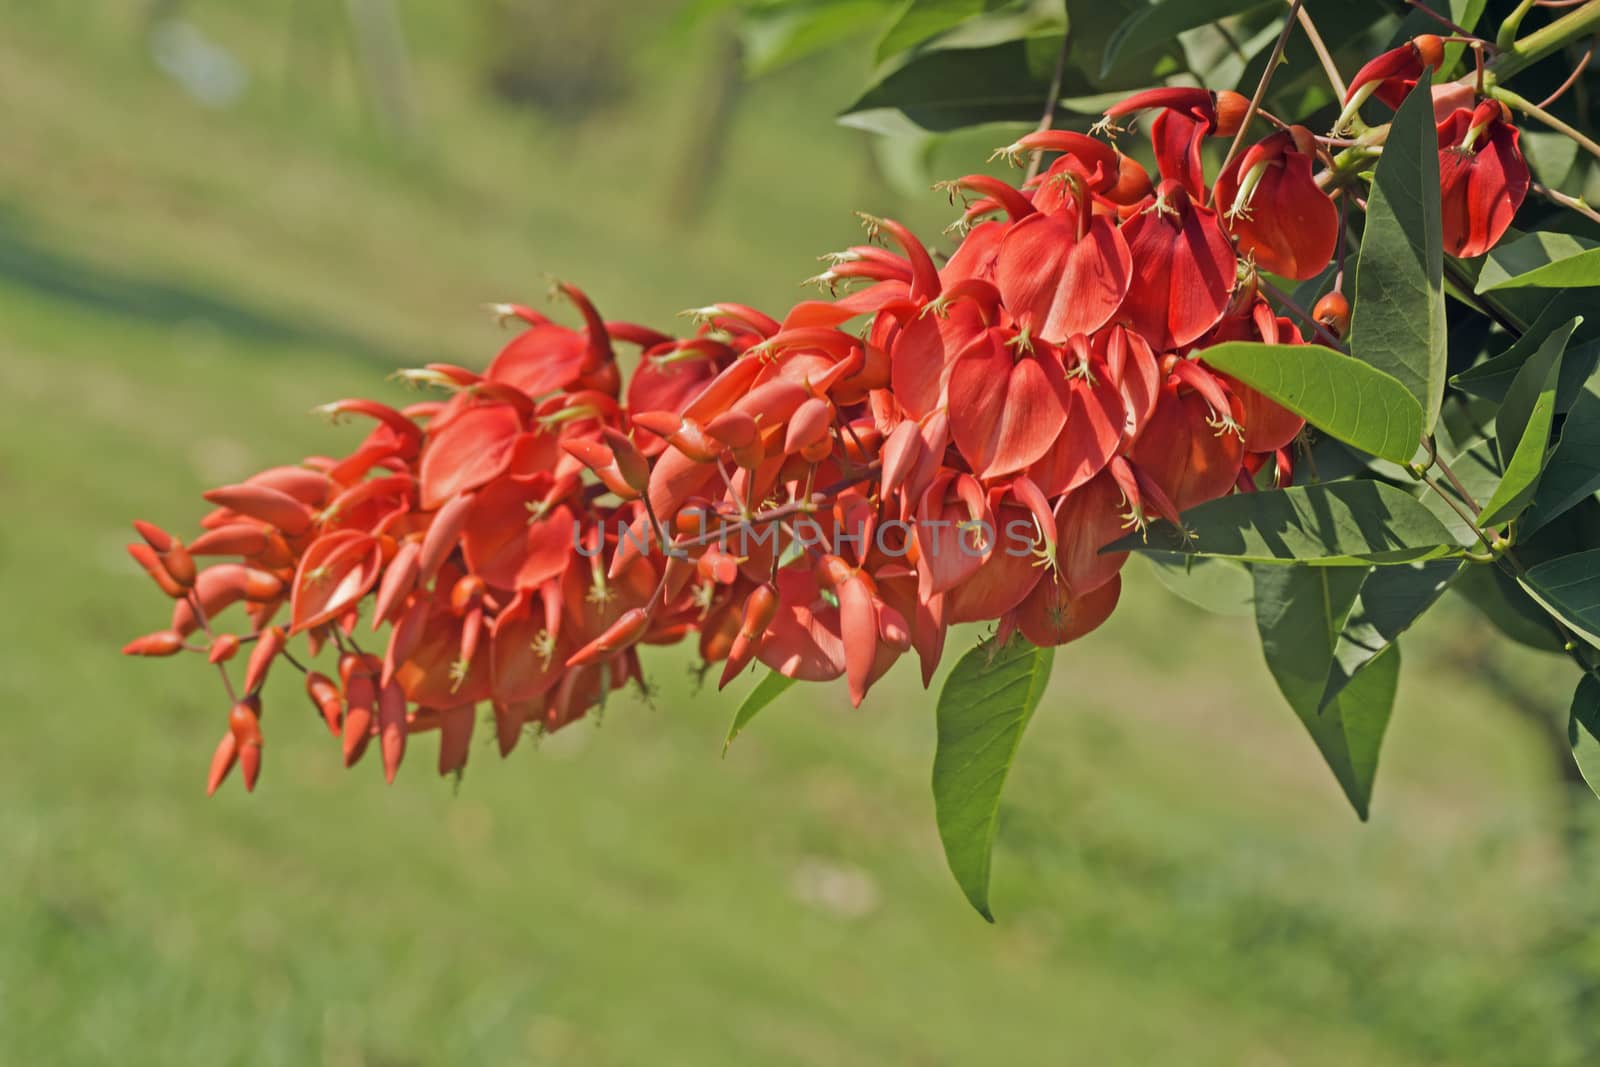 Comb Erythrina by xfdly5